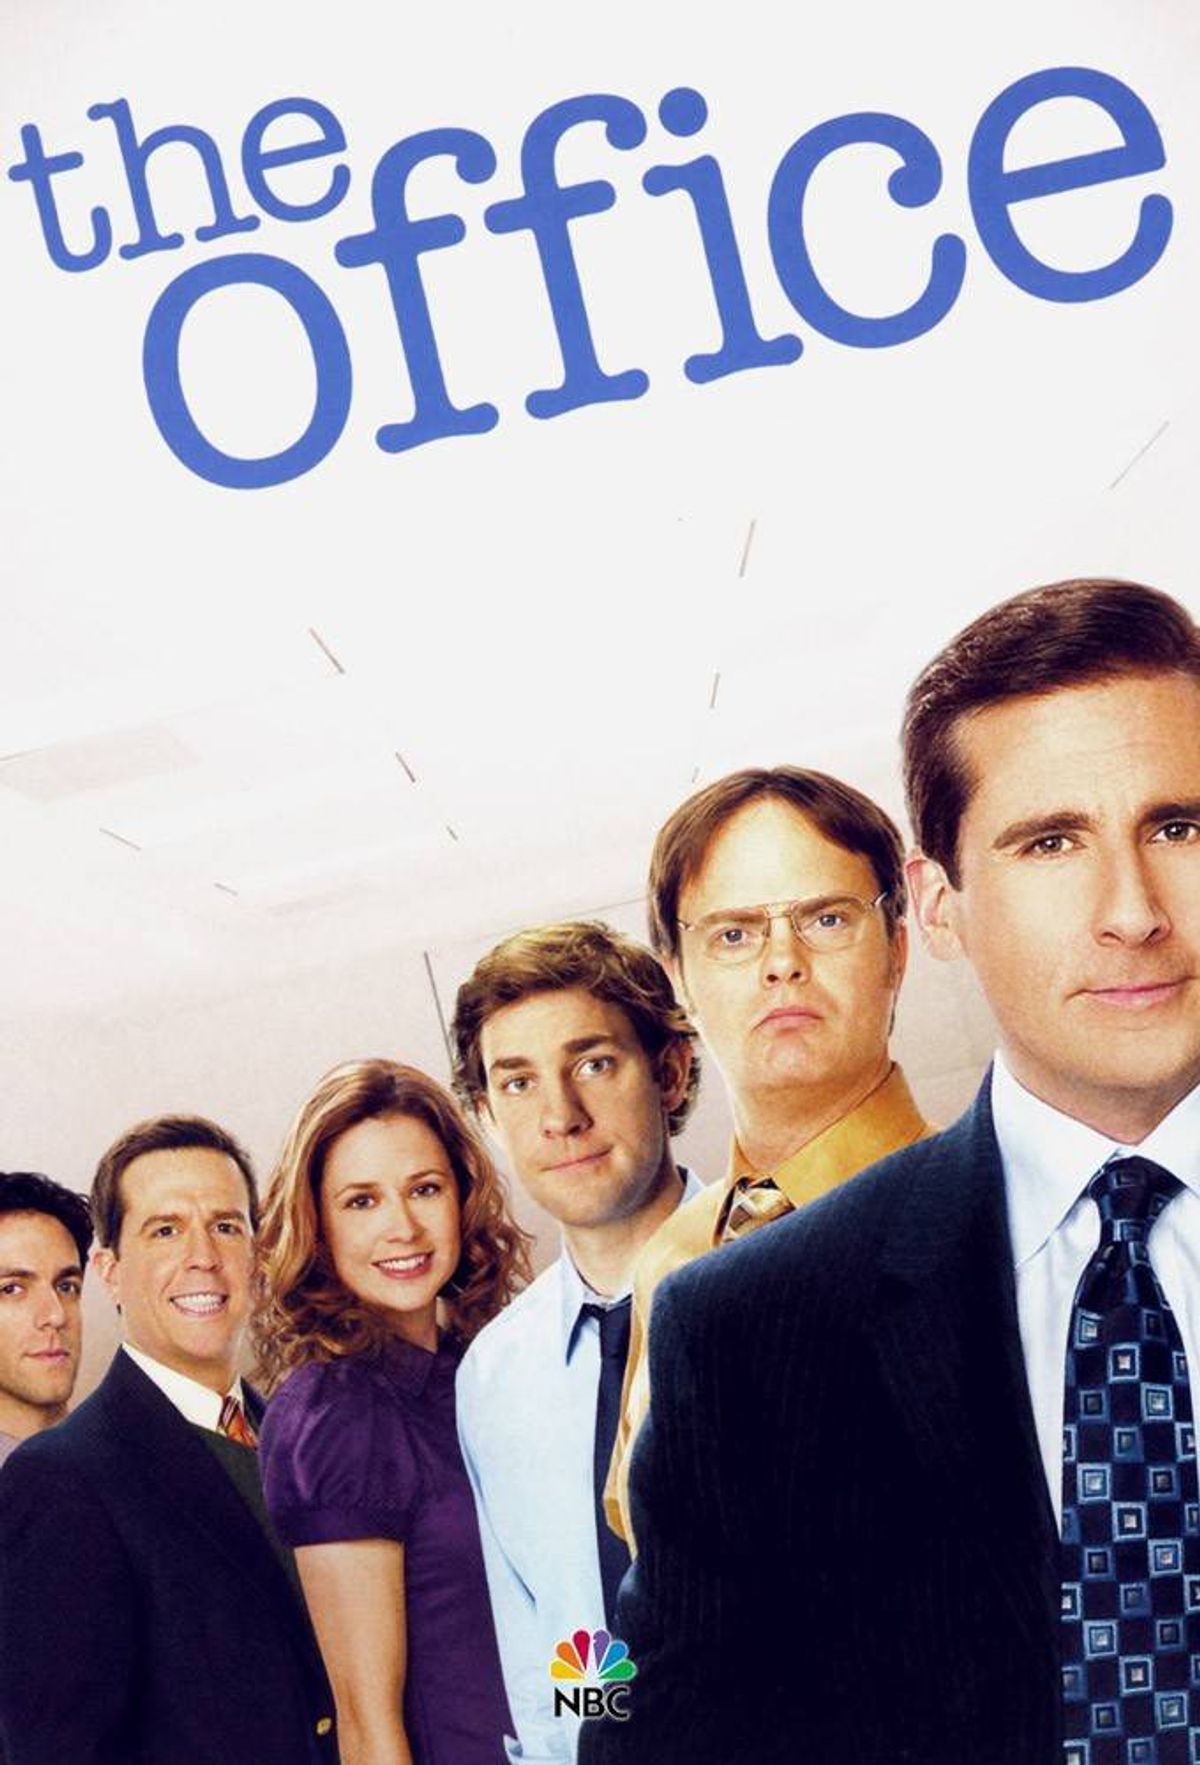 How Well Do You Know The Office?